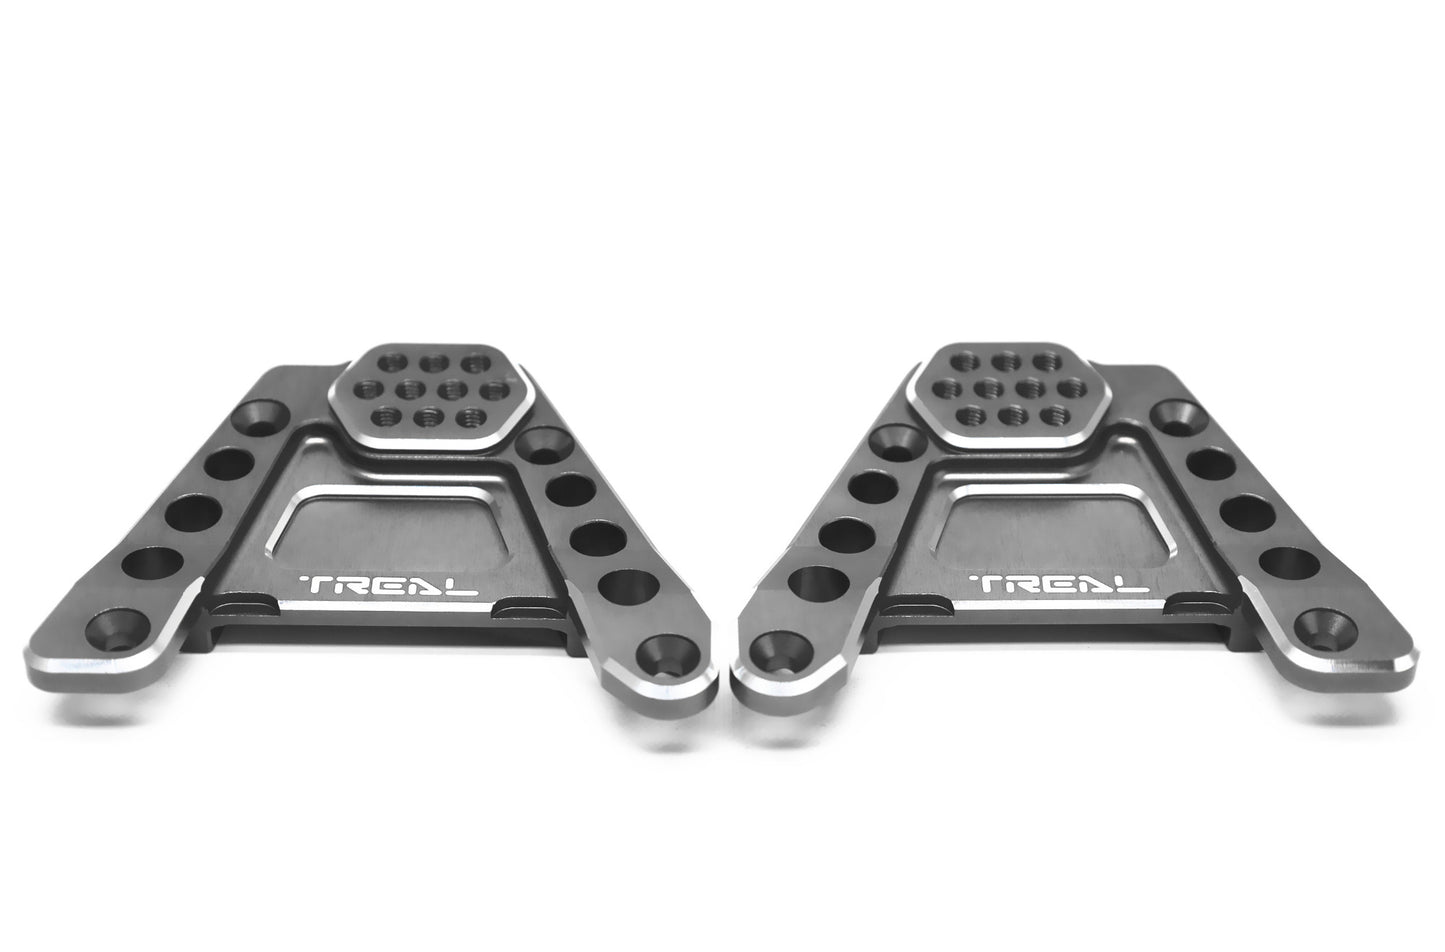 TREAL CNC Aluminum 7075 Rear Shock Towers for SCX6, Left/Right (2) pcs Hoops Bracket Mount Upgrades for 1/6 Axial SCX6